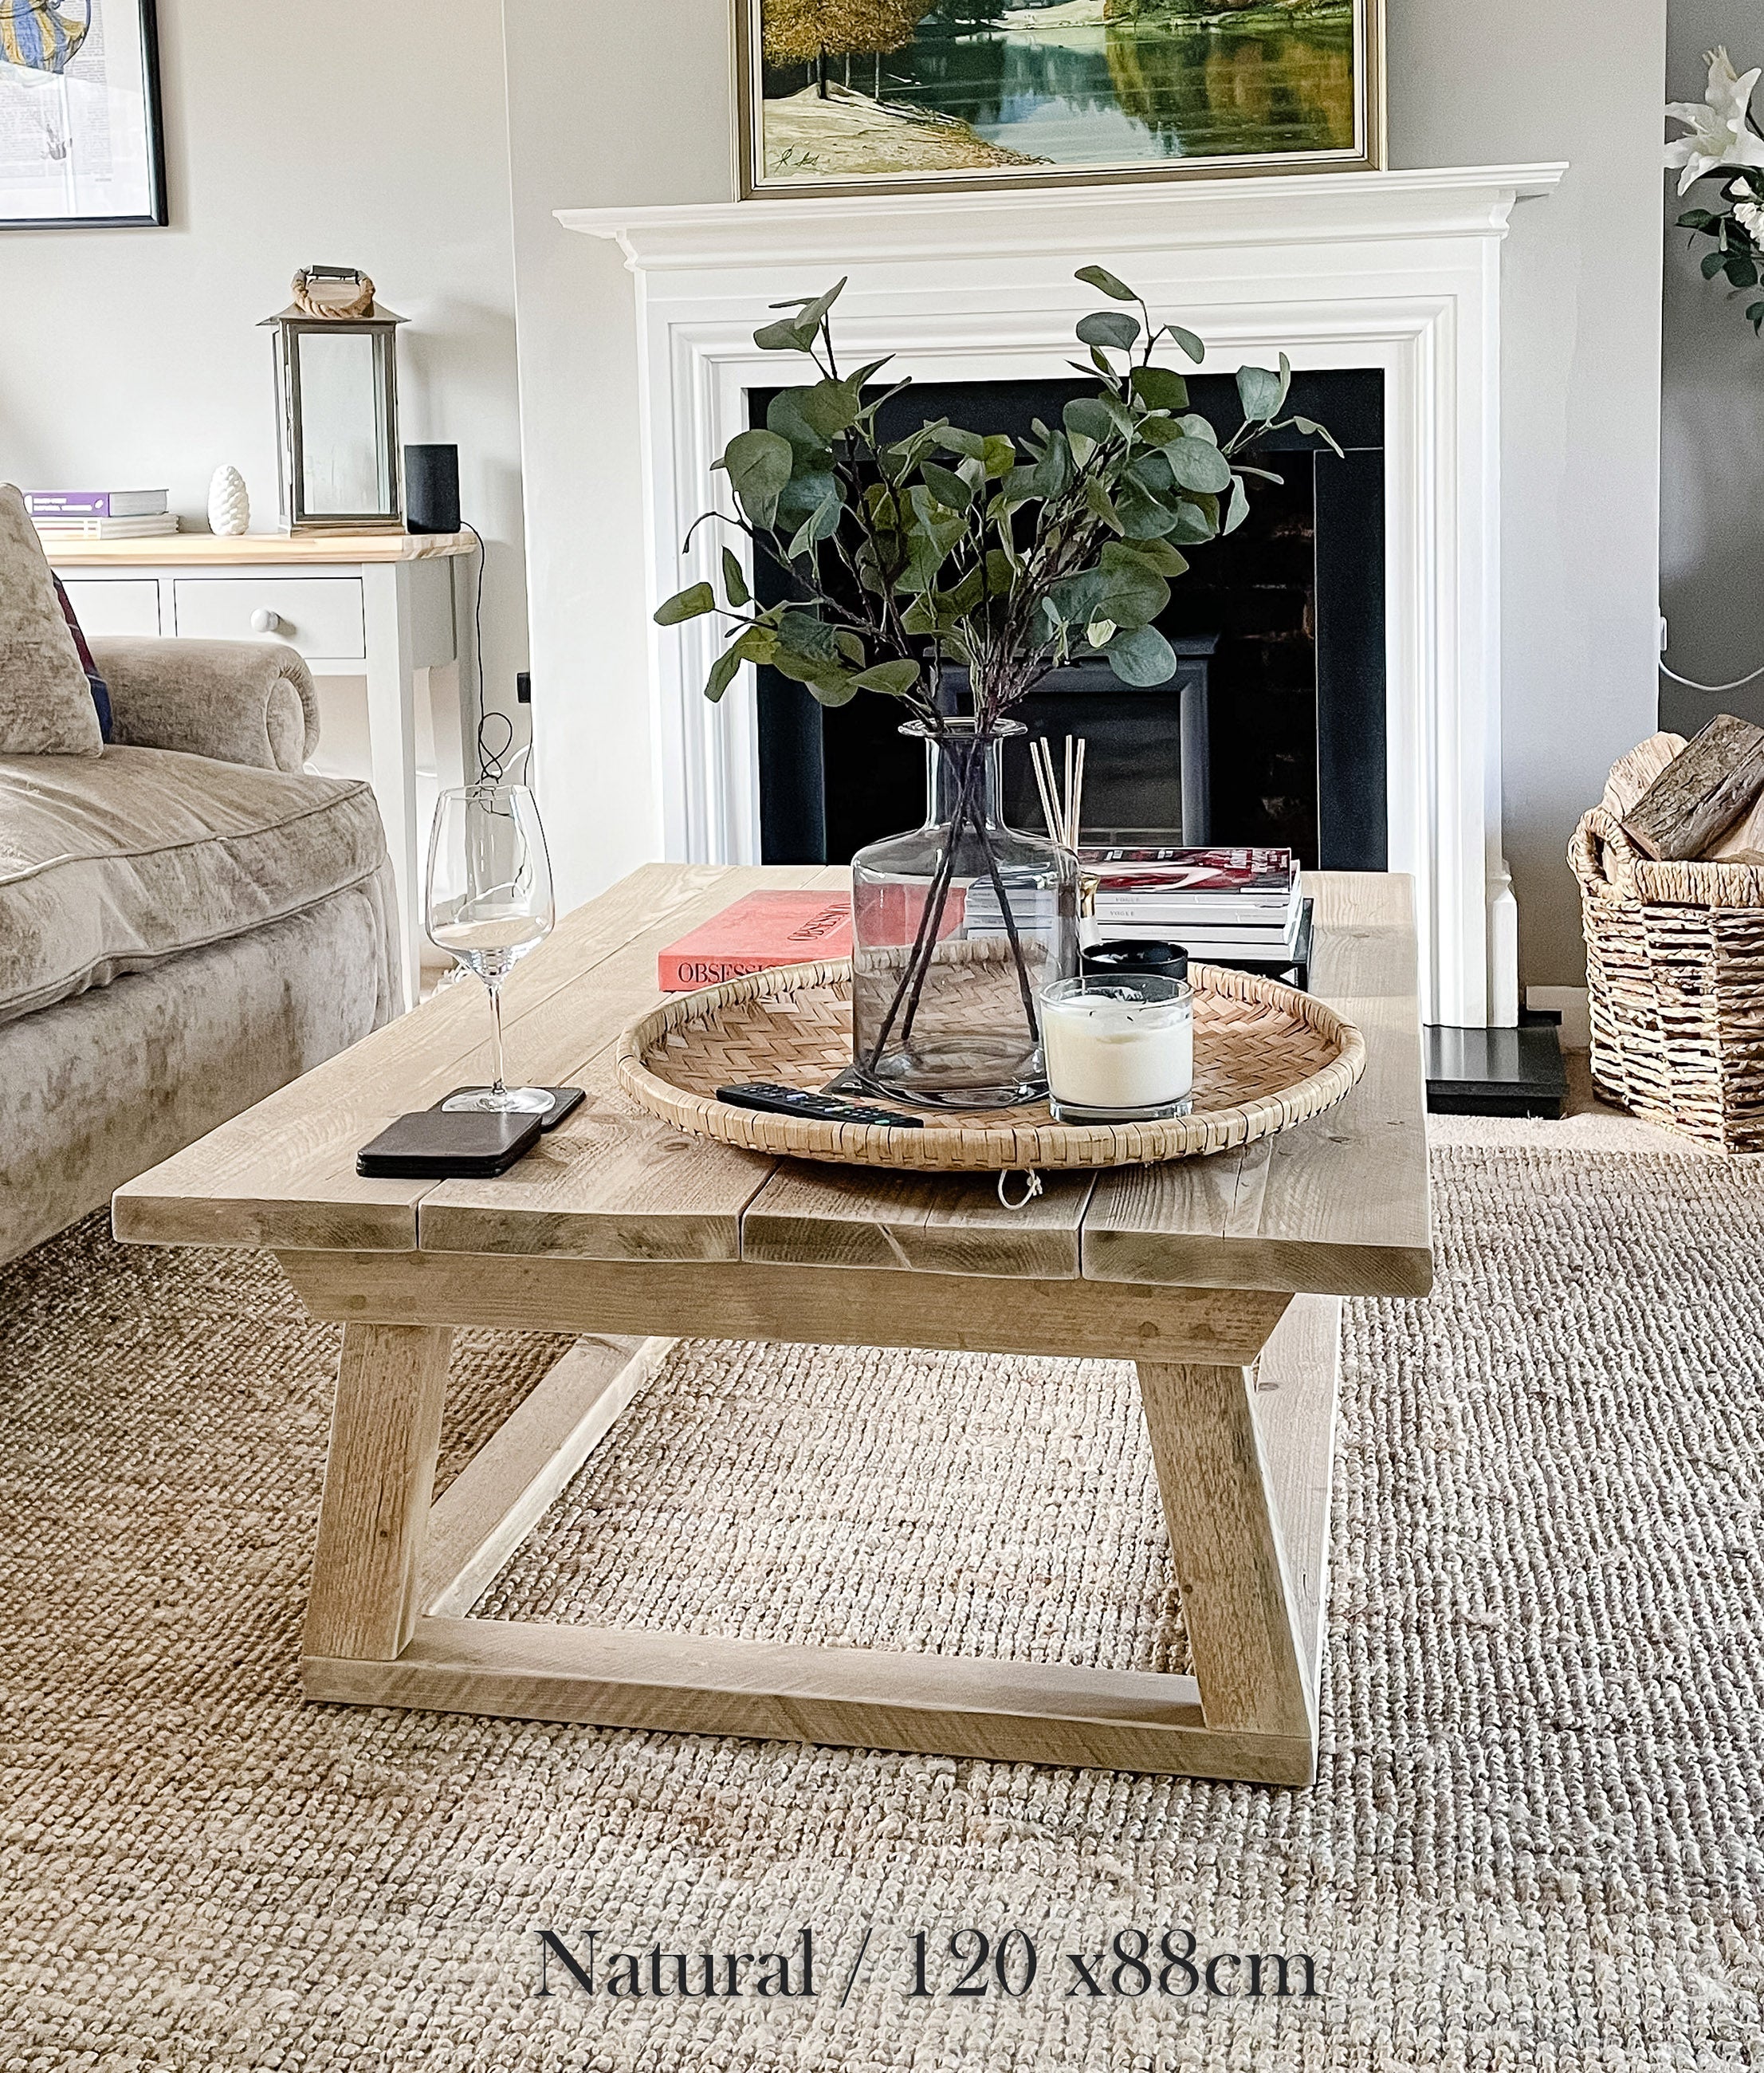 The 'Hoxton' Reclaimed Wood Coffee Table